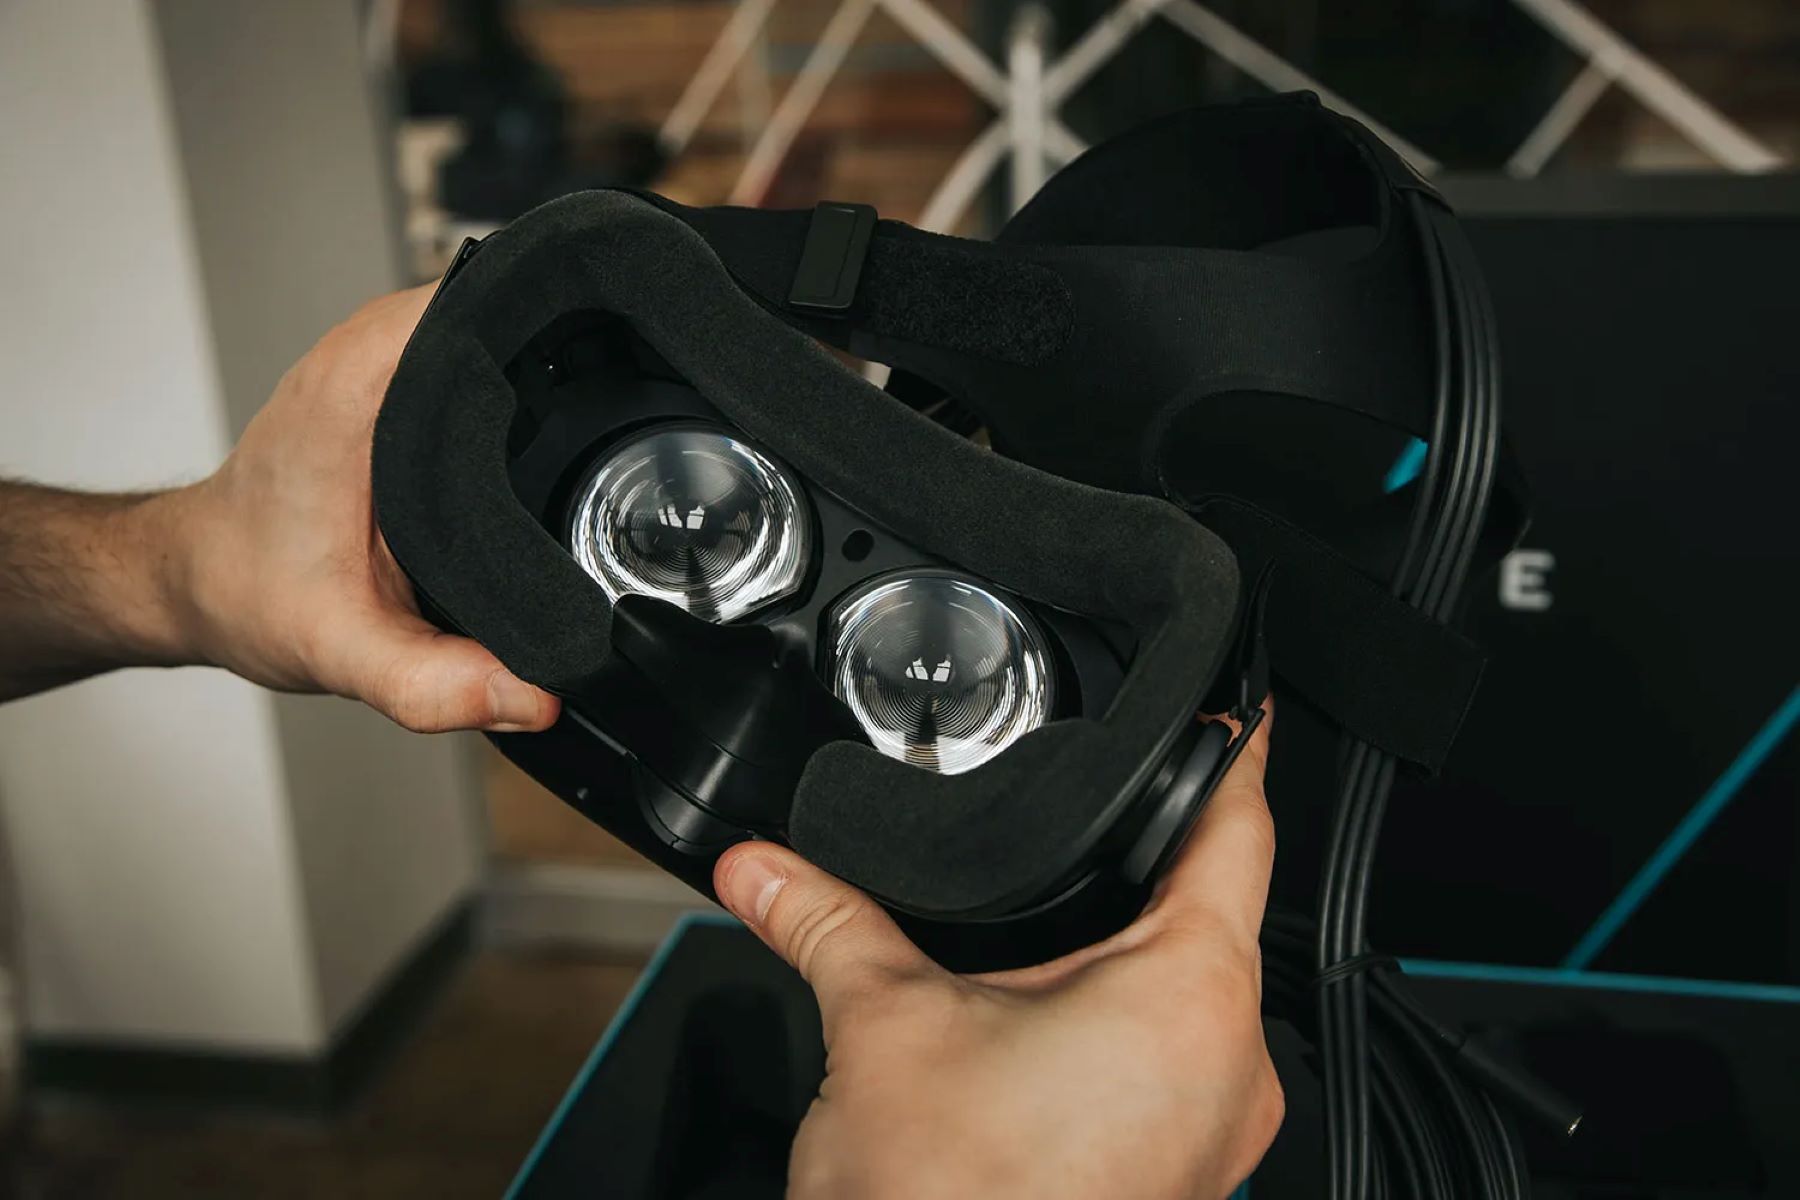 htc-vive-headset-on-when-not-in-use